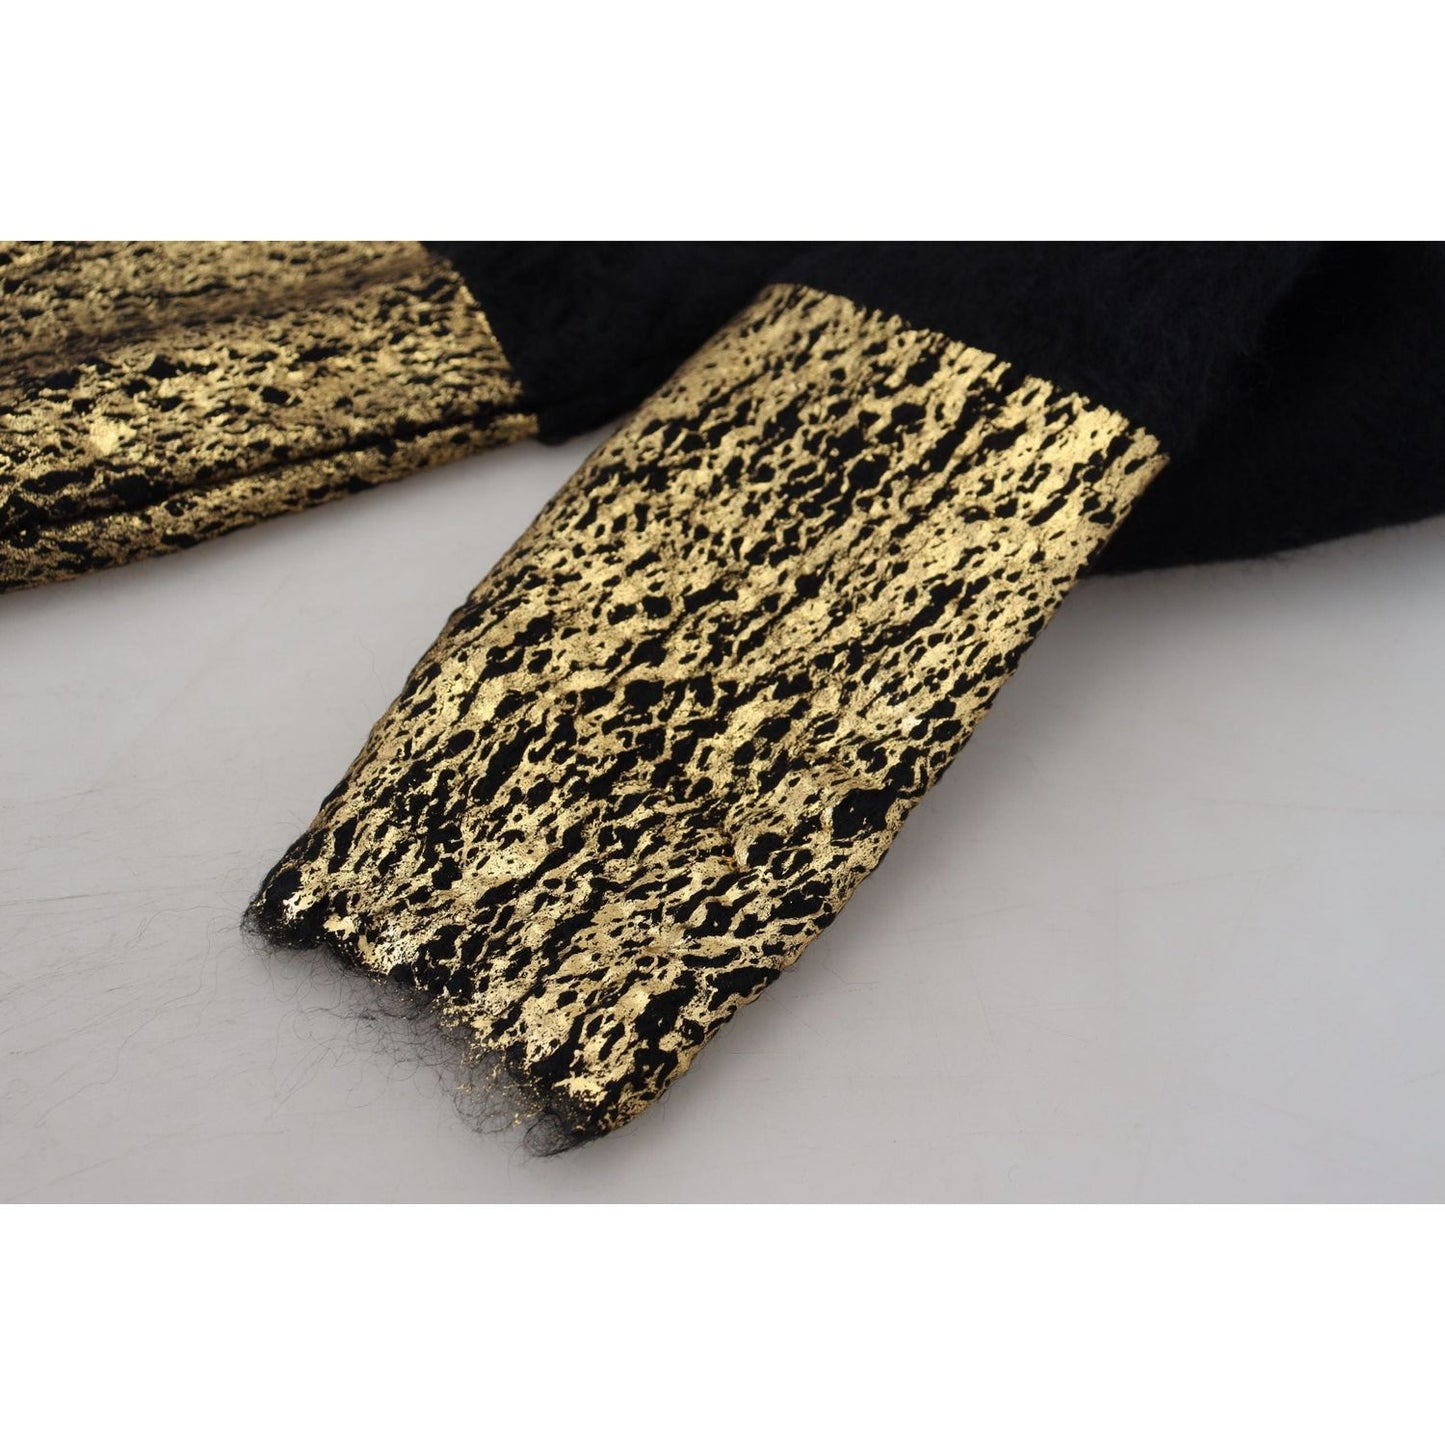 Dolce & Gabbana Stunning Black and Gold Crewneck Sweater black-gold-turtleneck-mohair-pullover-mens-sweater